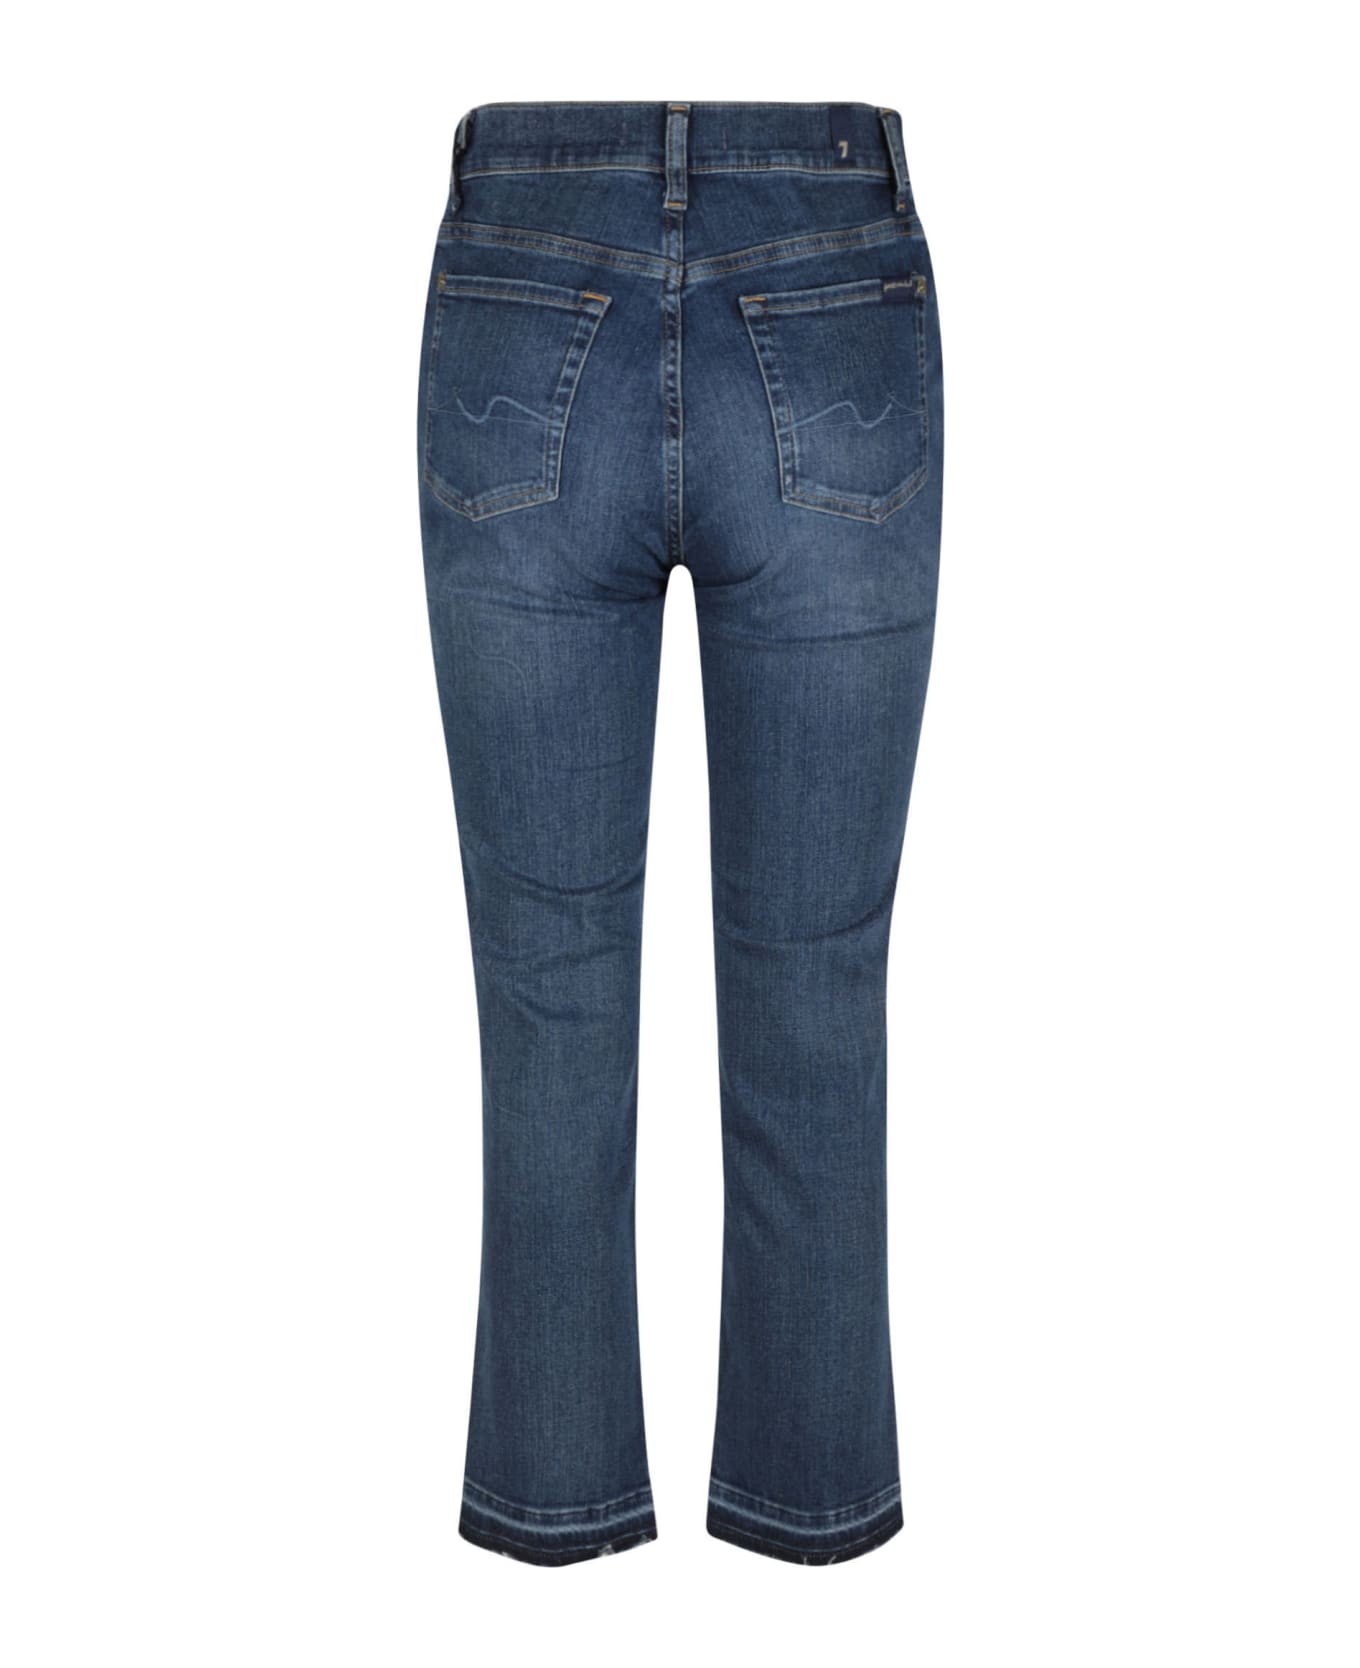 7 For All Mankind The Straight Crop Jeans - Light Blue